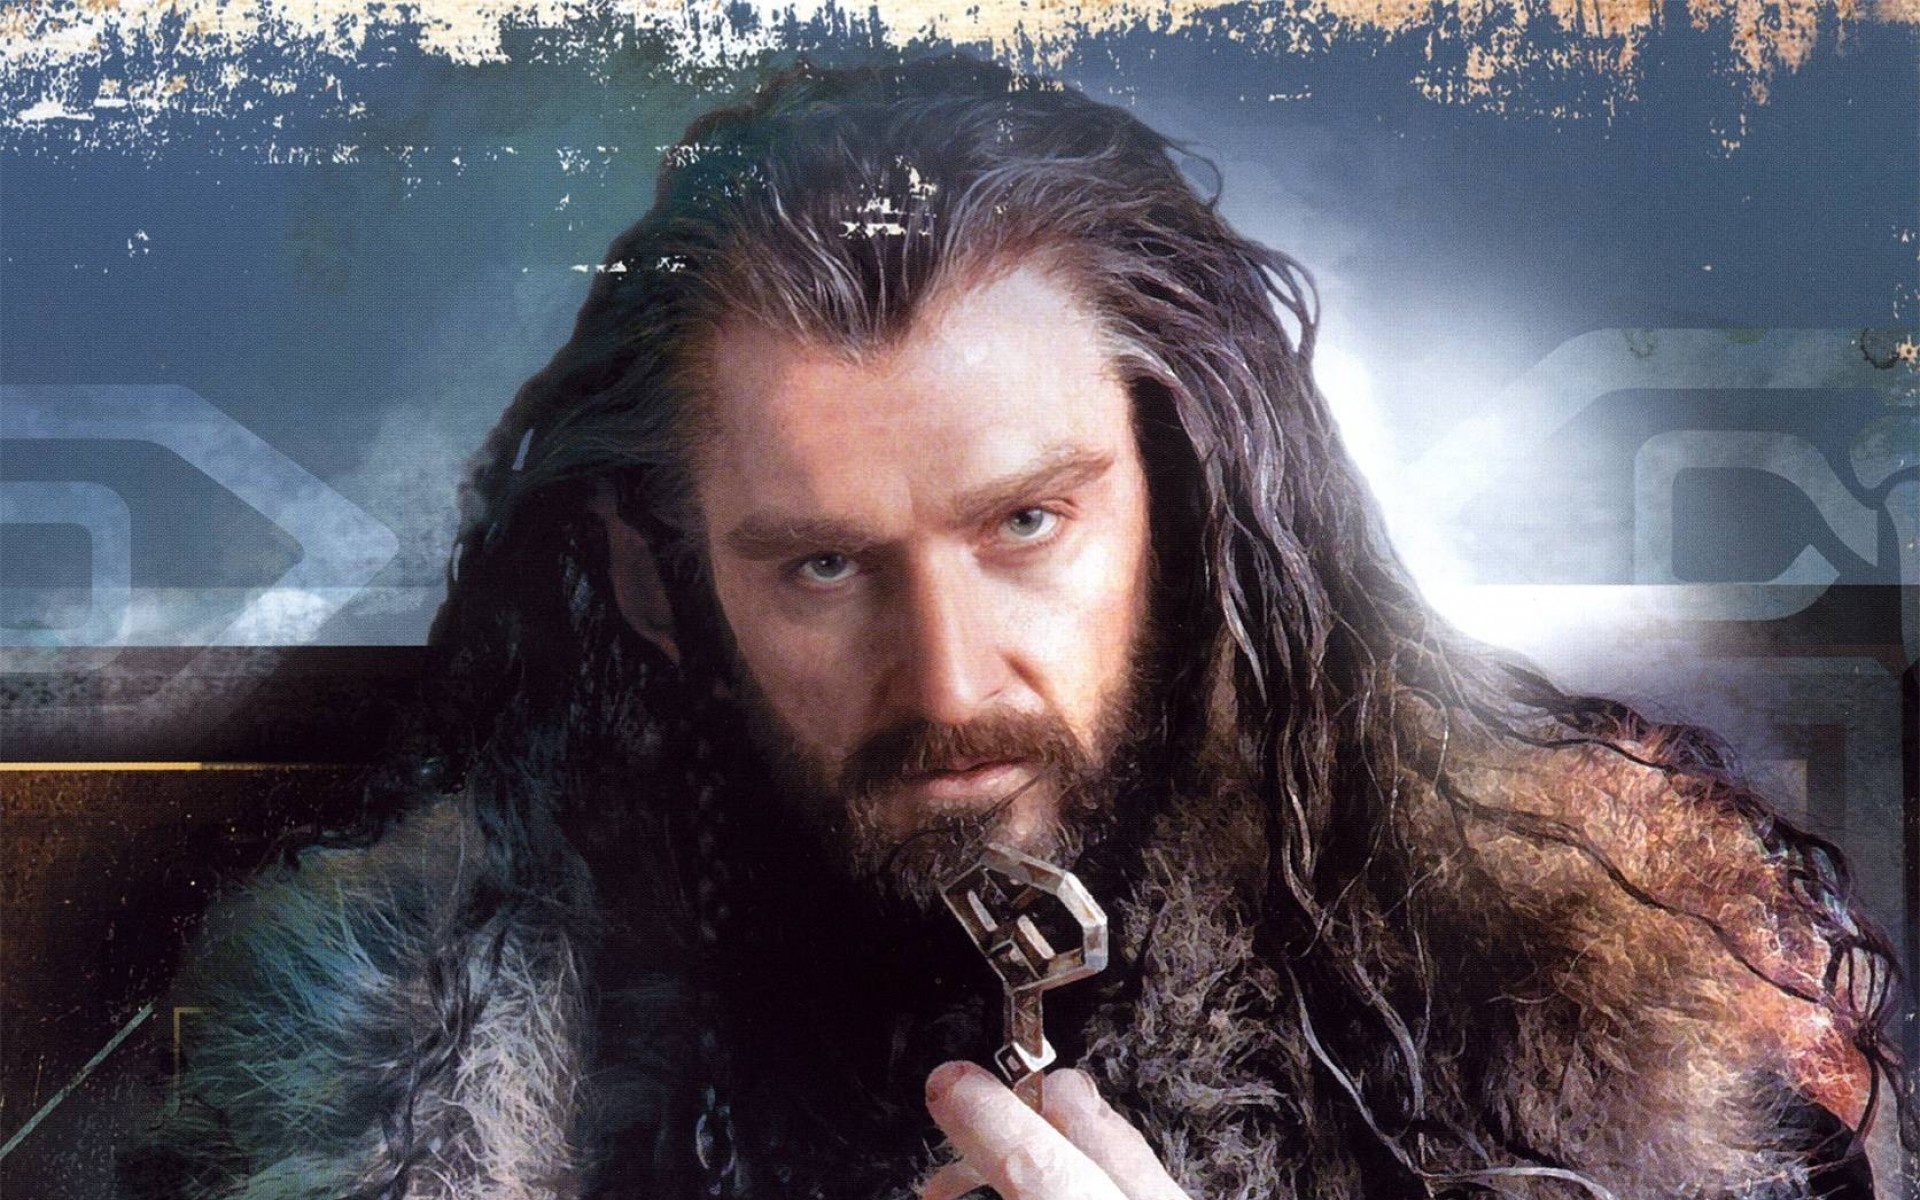 Thorin Oakenshield wallpapers, Extensive collection, High quality, 1920x1200 HD Desktop